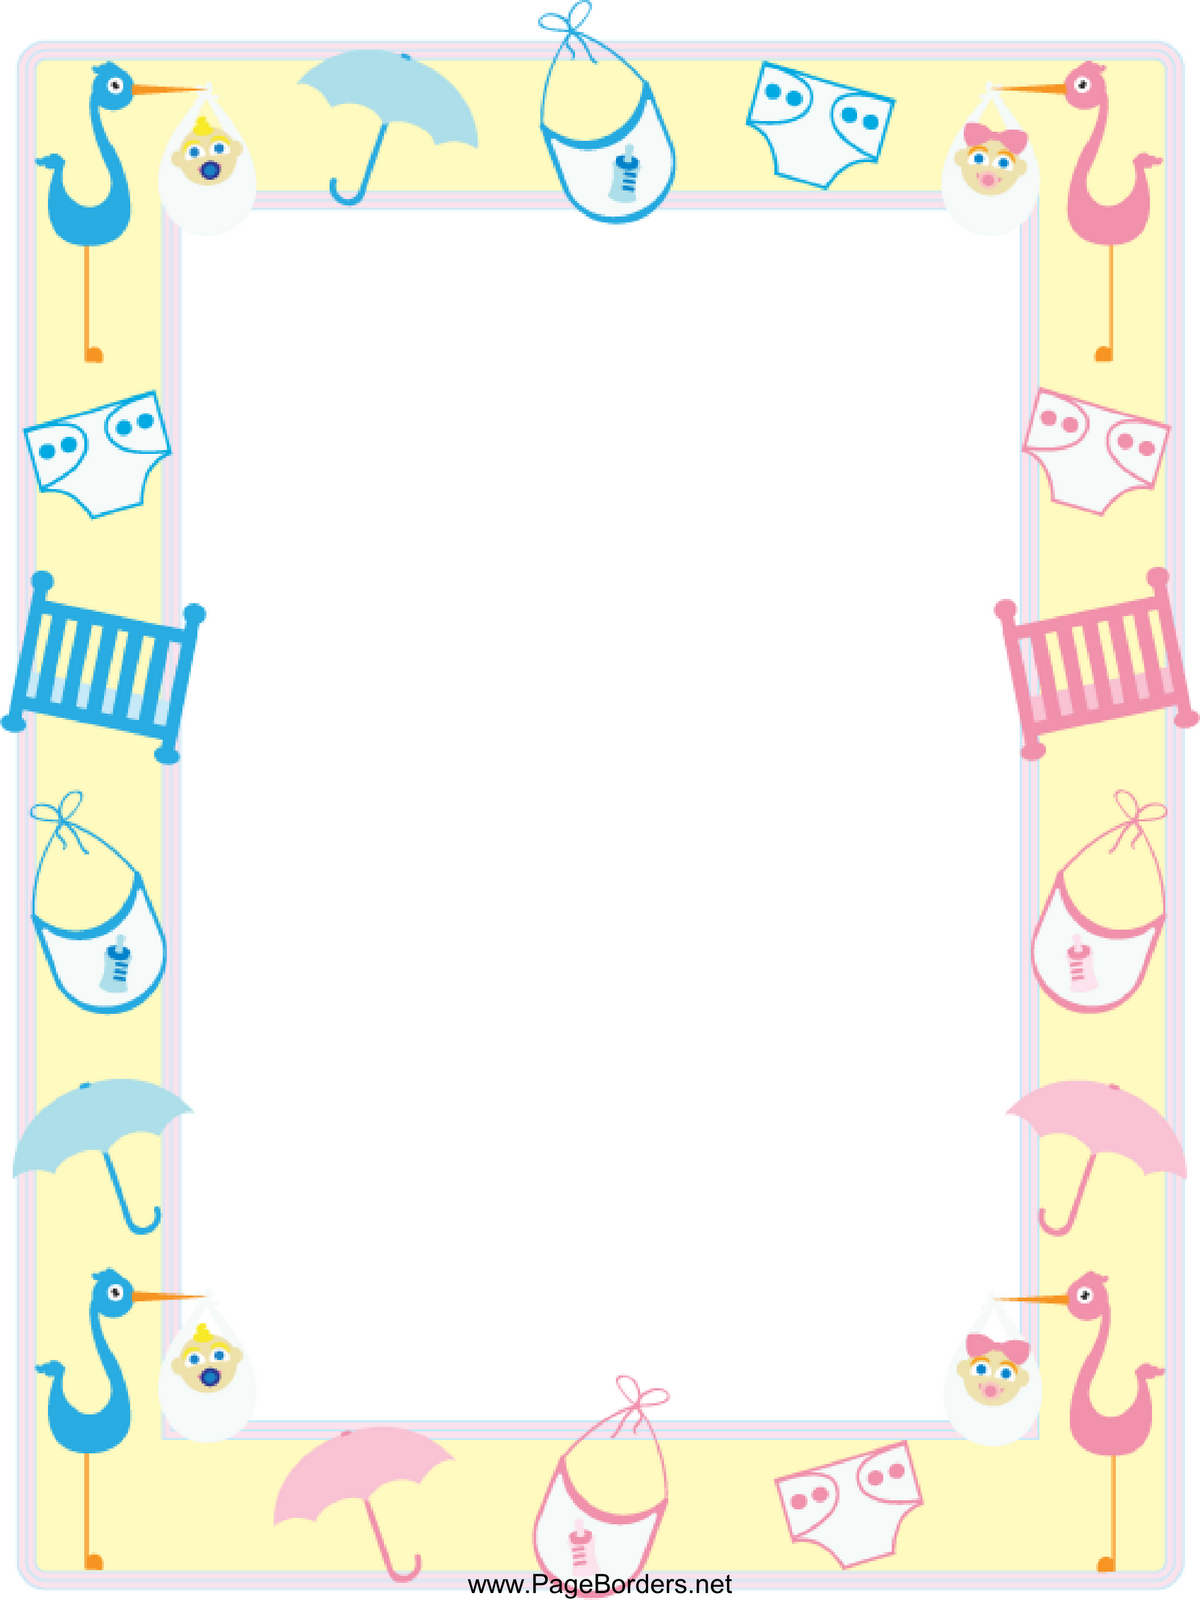 free borders for baby shower clip art - photo #6